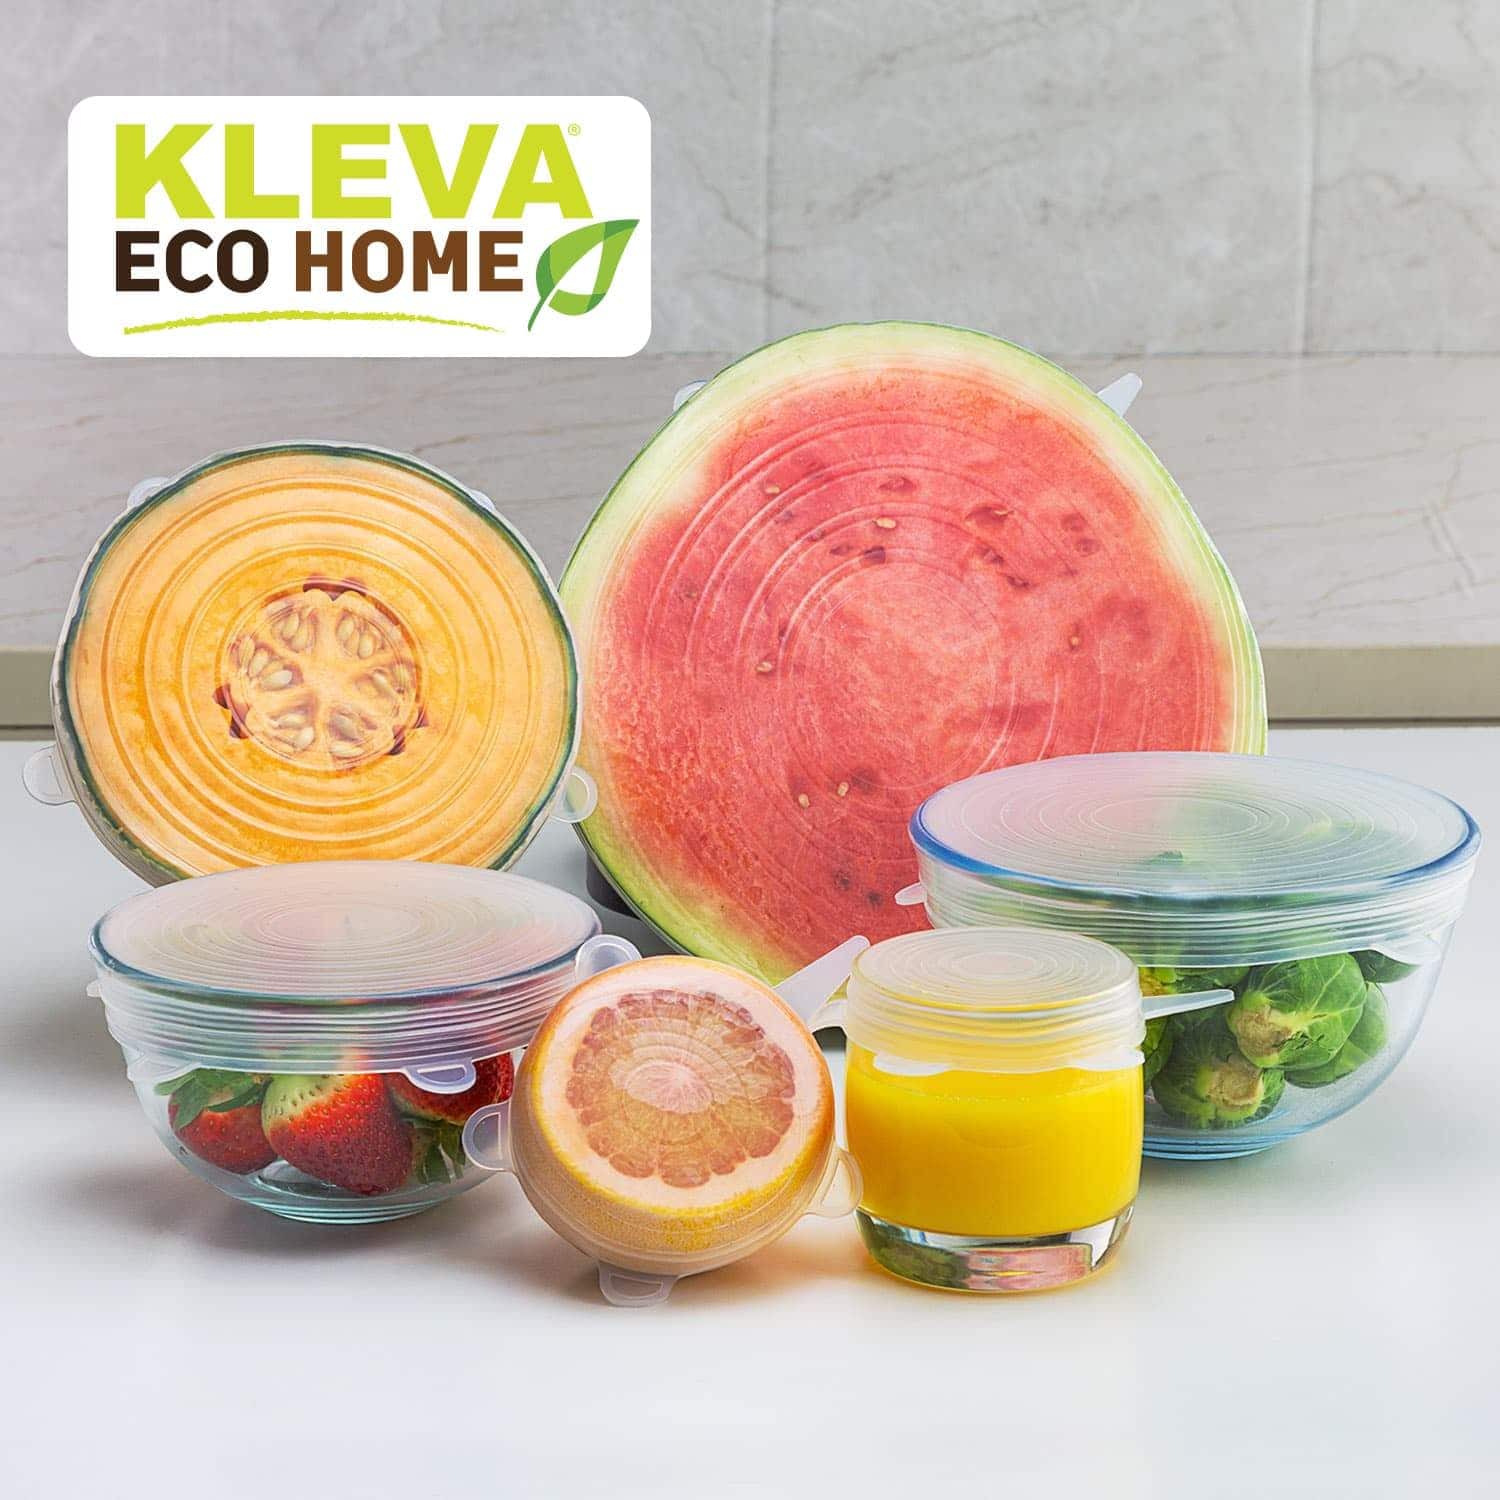 Flexi Stretchy Eco Lids - Reusable, Silicone Food Covers Perfect For Leftovers! Kitchen Kleva Range - Everyday Innovations   